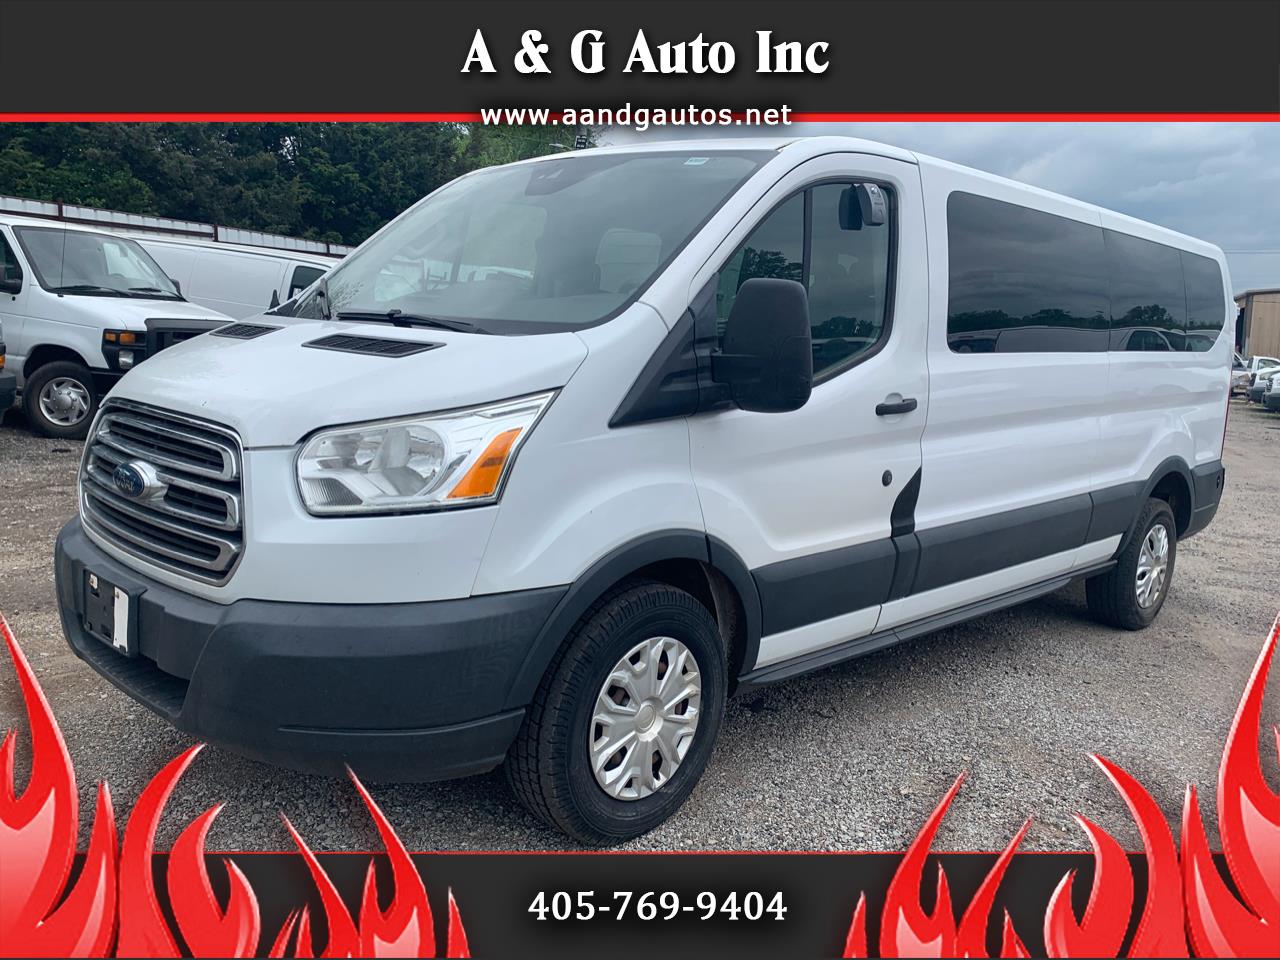 2015 Ford Transit for sale in Oklahoma City OK 73141 by A & G Auto Inc